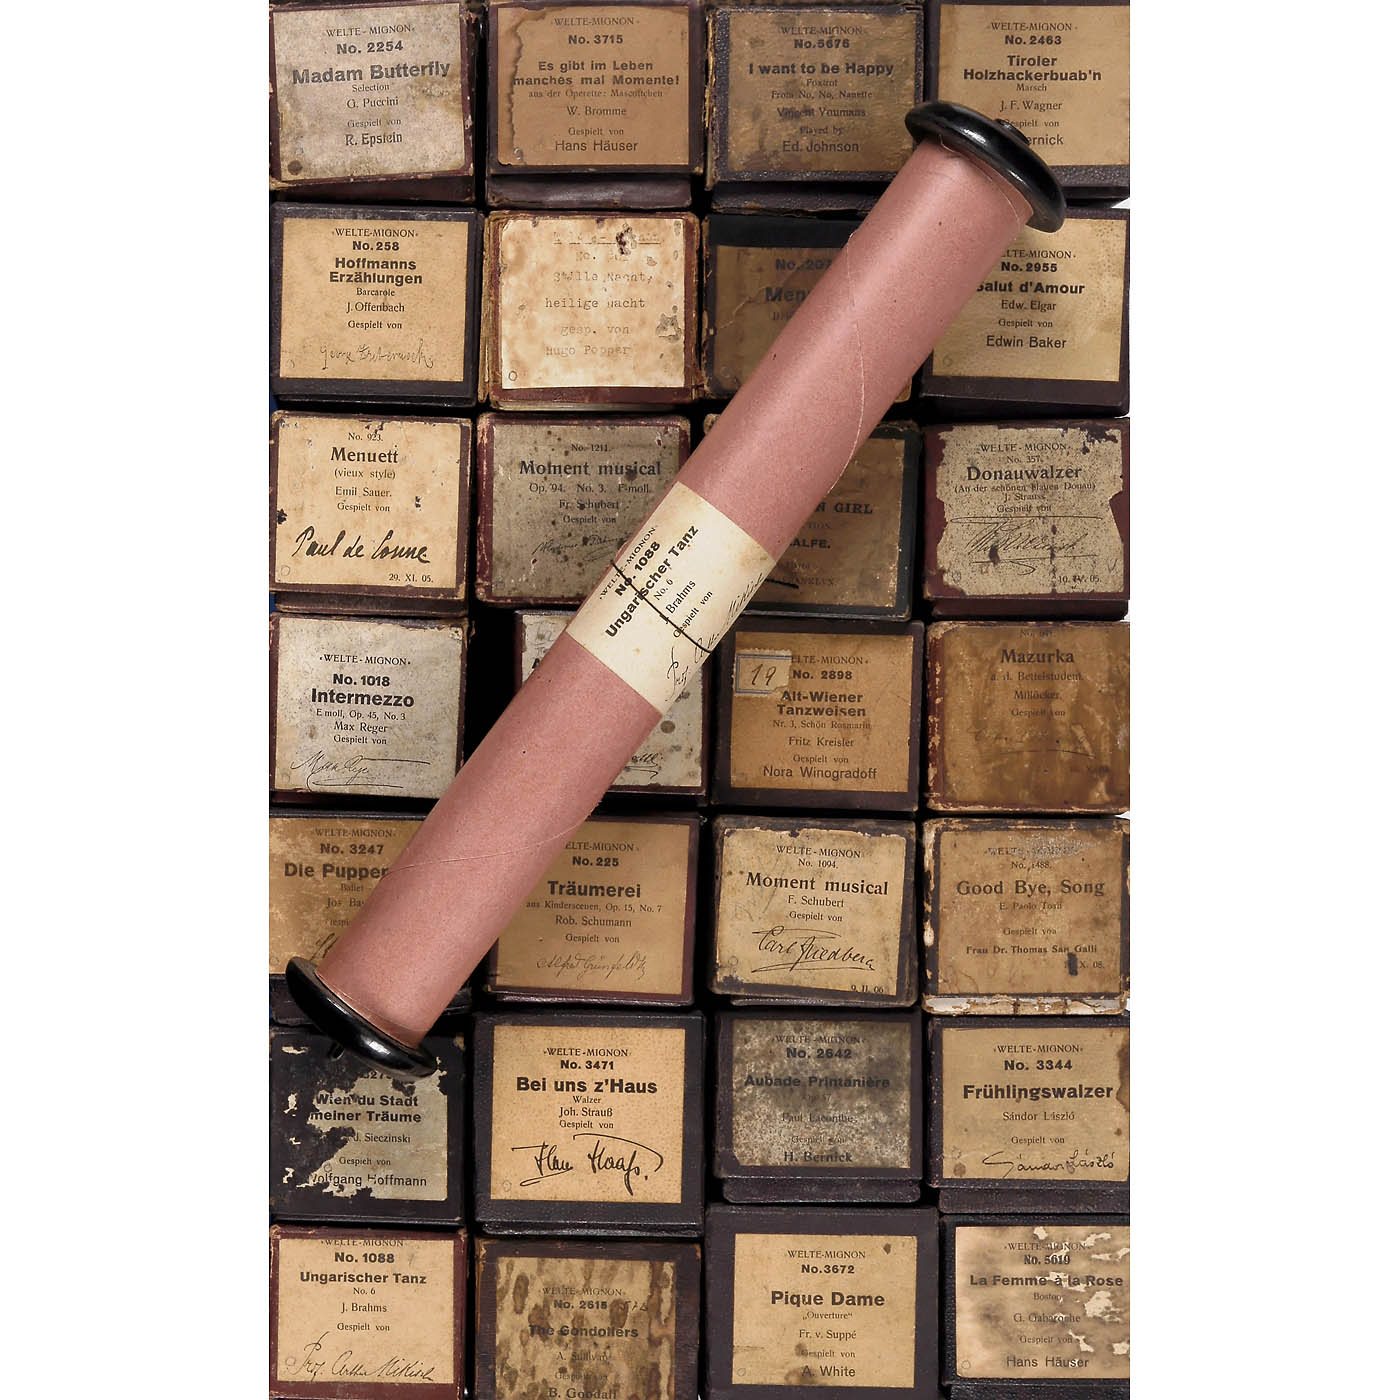 54 Welte-Mignon Reproducing Piano Rolls (T 100 -Red), 1905 onwards - Image 3 of 8